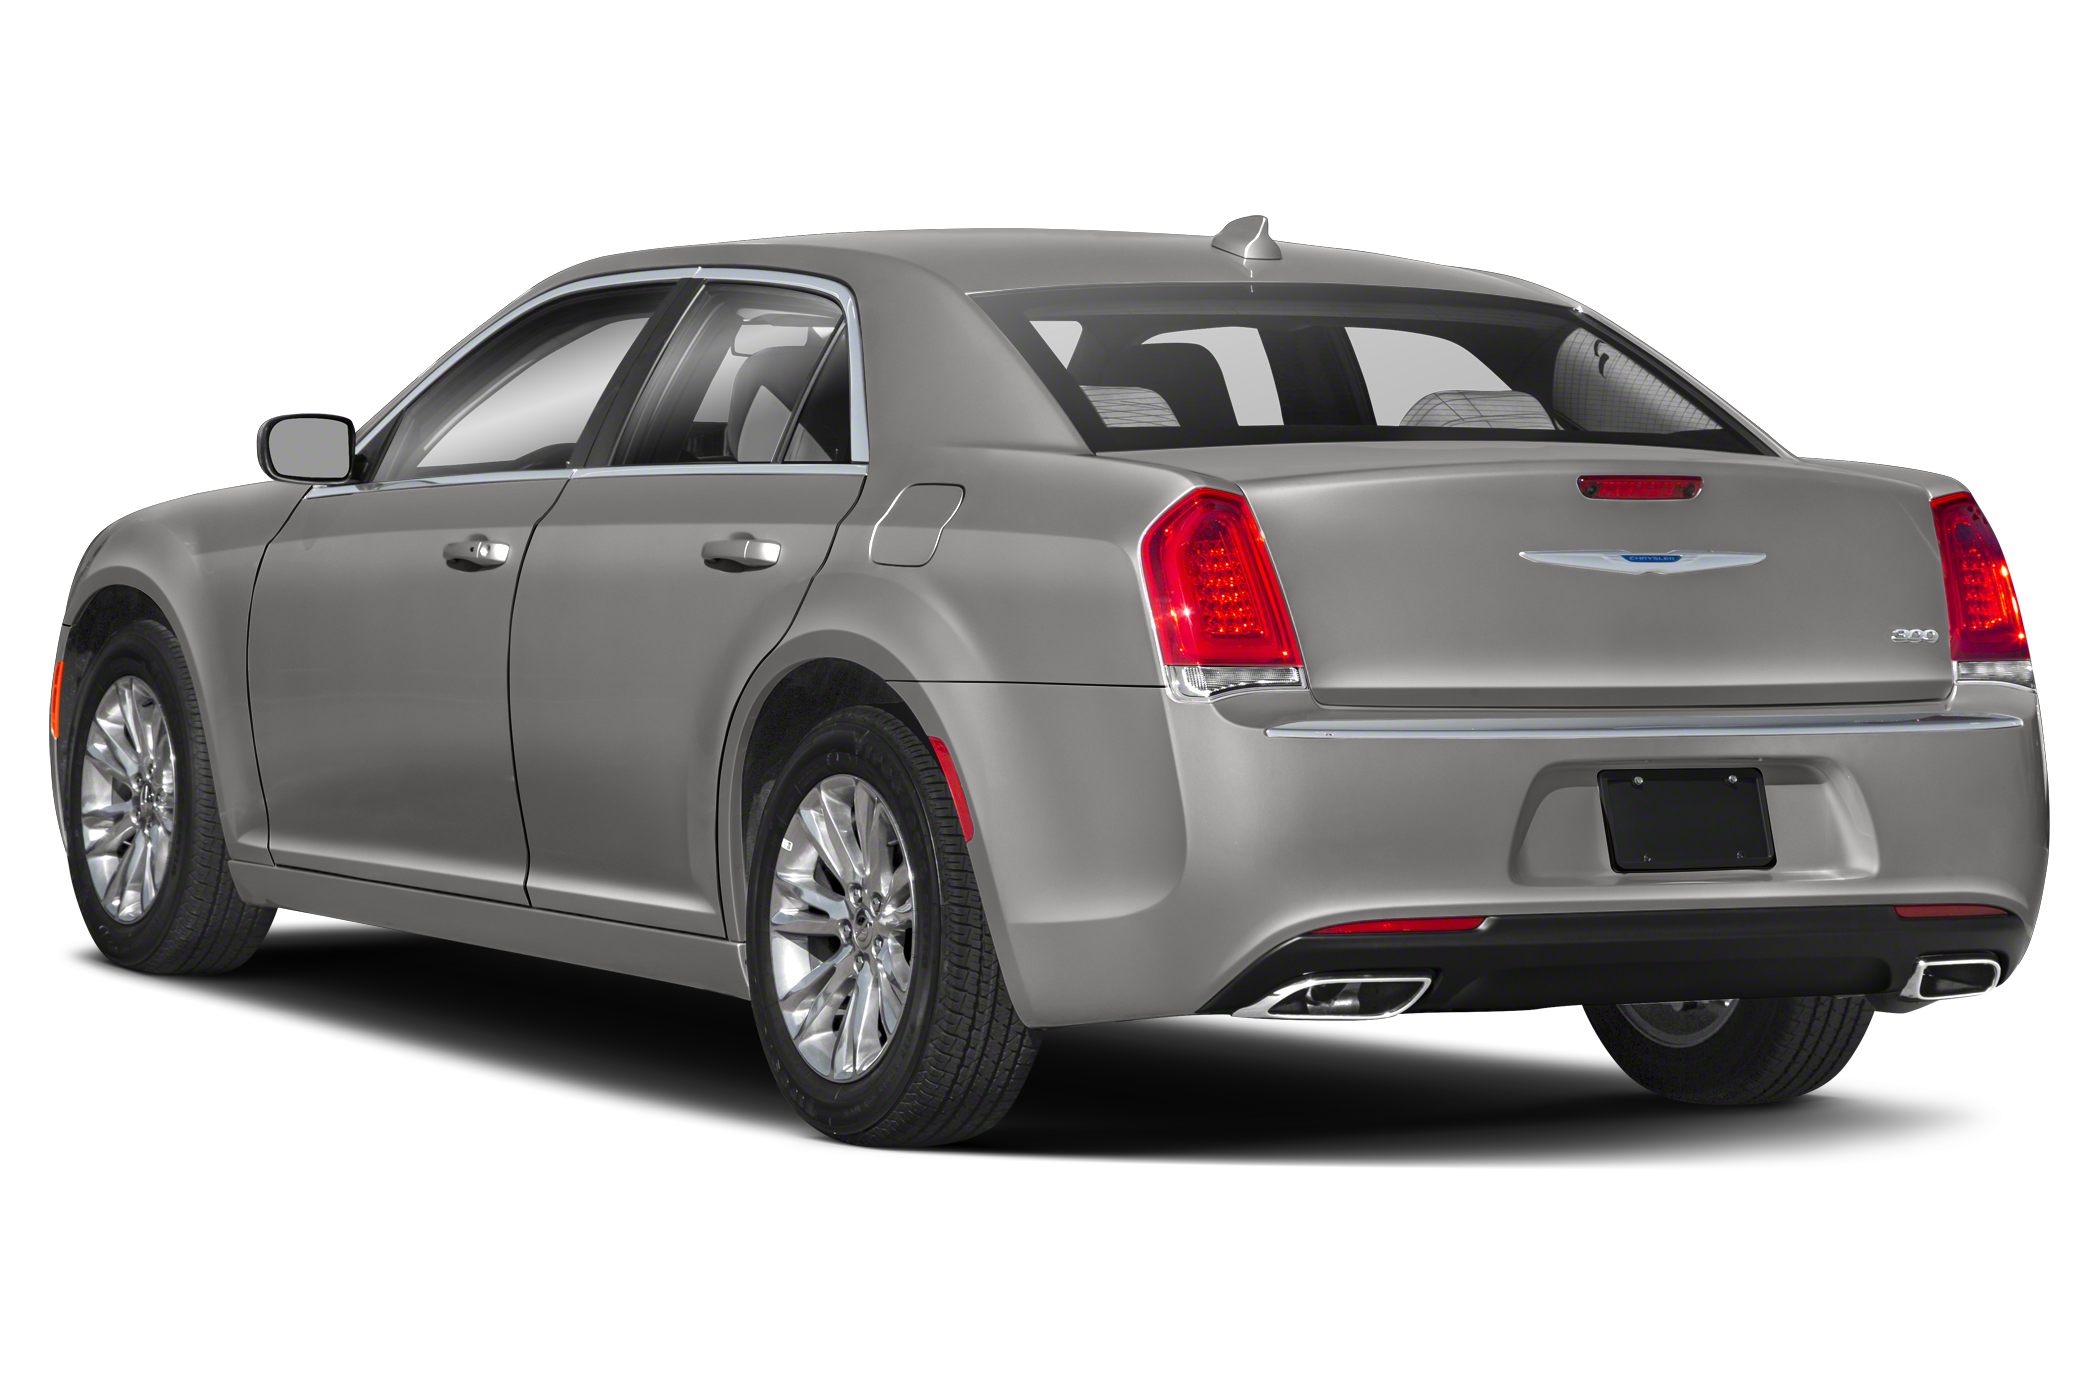 2022 Chrysler 300 Touring 4dr All Wheel Drive Sedan Pricing And Options